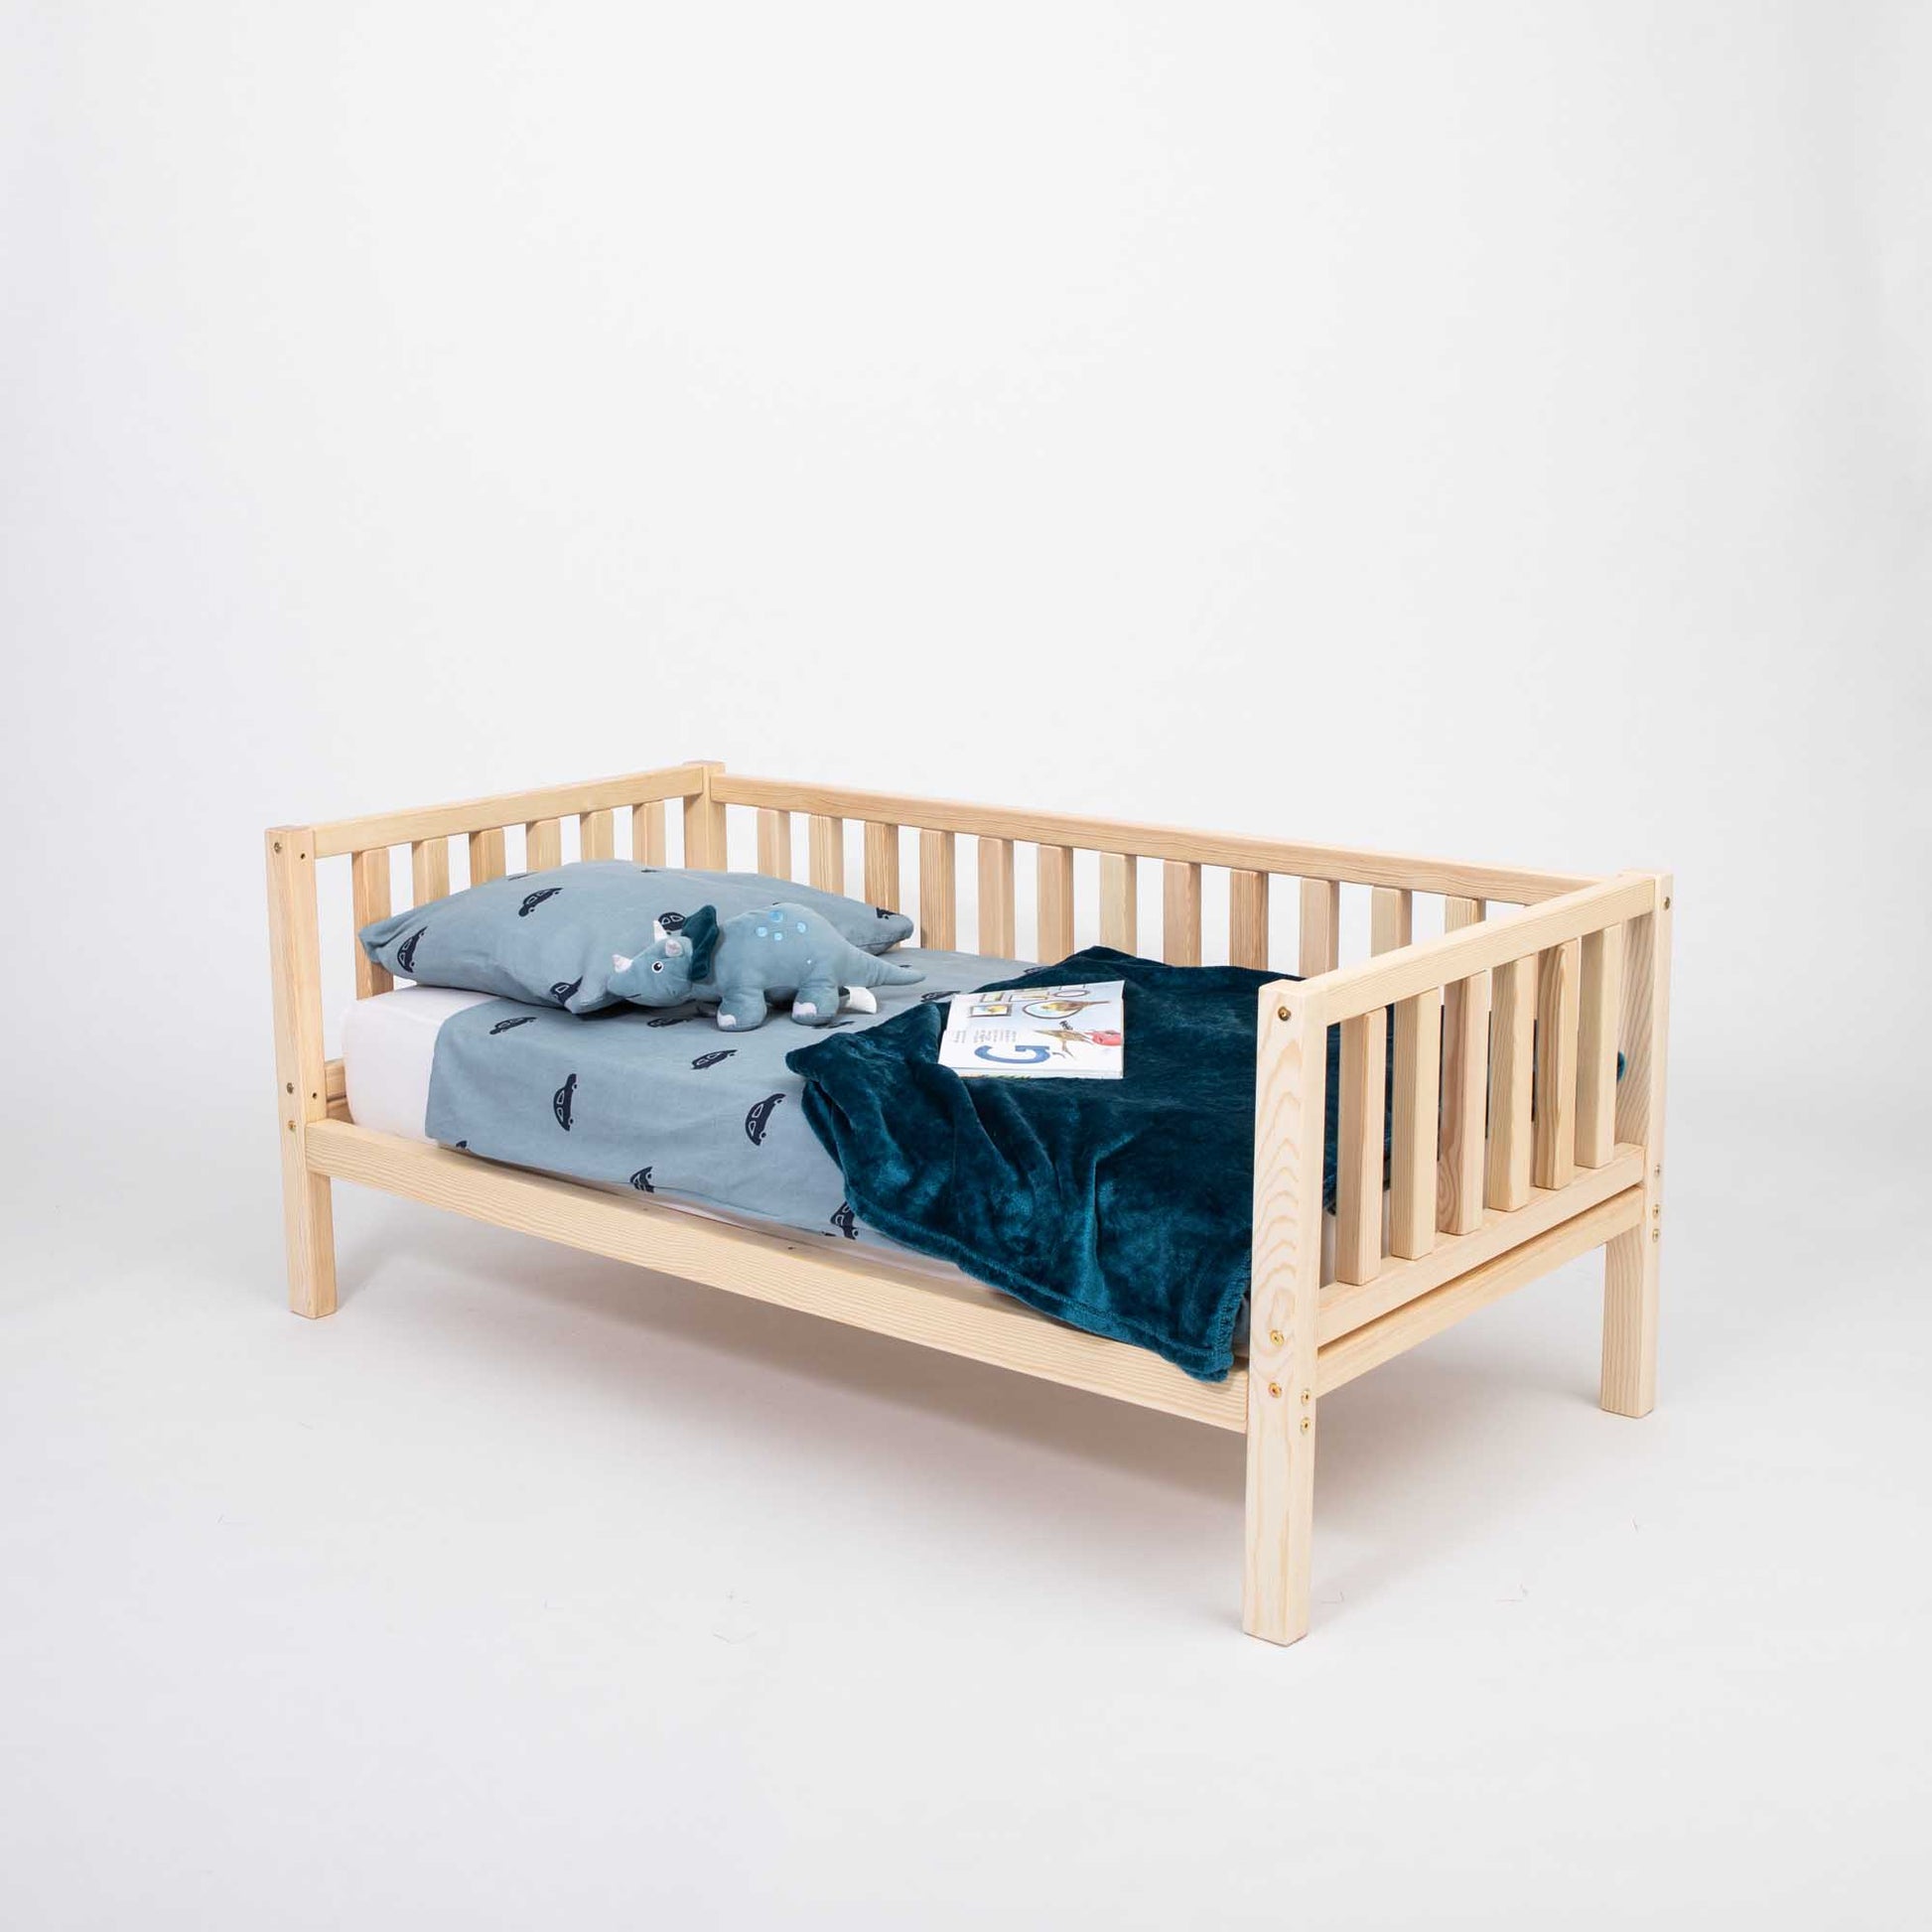 A Sweet Home From Wood Kids' platform bed on legs with 3-sided rails with a blue blanket on it.